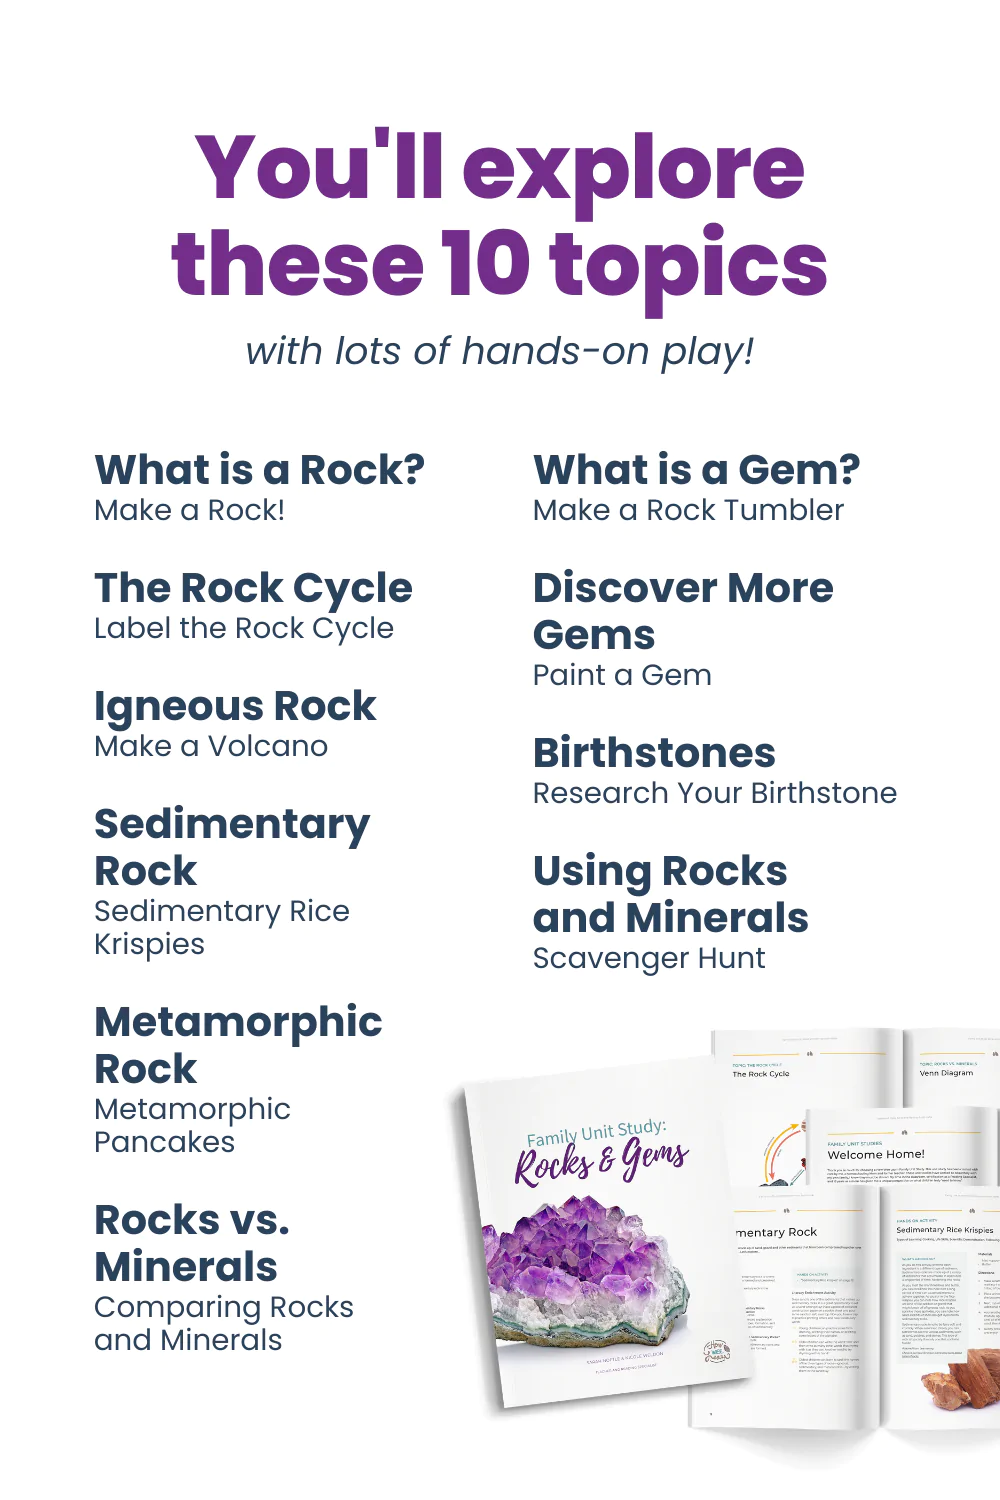 Learn all about rocks and gems through hands-on activities, interesting facts and discussion questions, math and literacy extension questions, YouTube videos, and more!